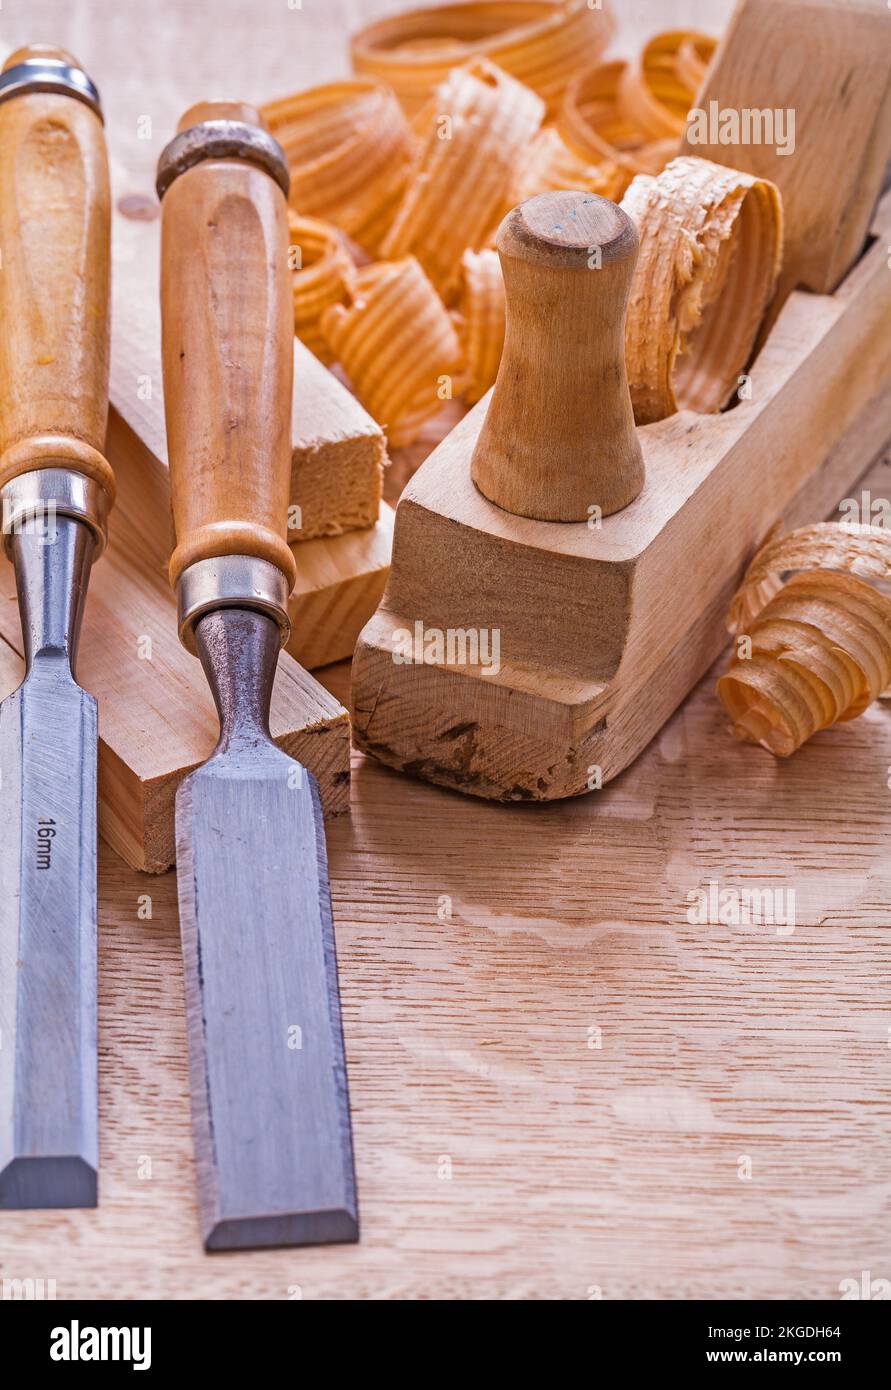 Closeup Chisel Carpentry Joinery Hand Cutting Stock Photo 2195172735